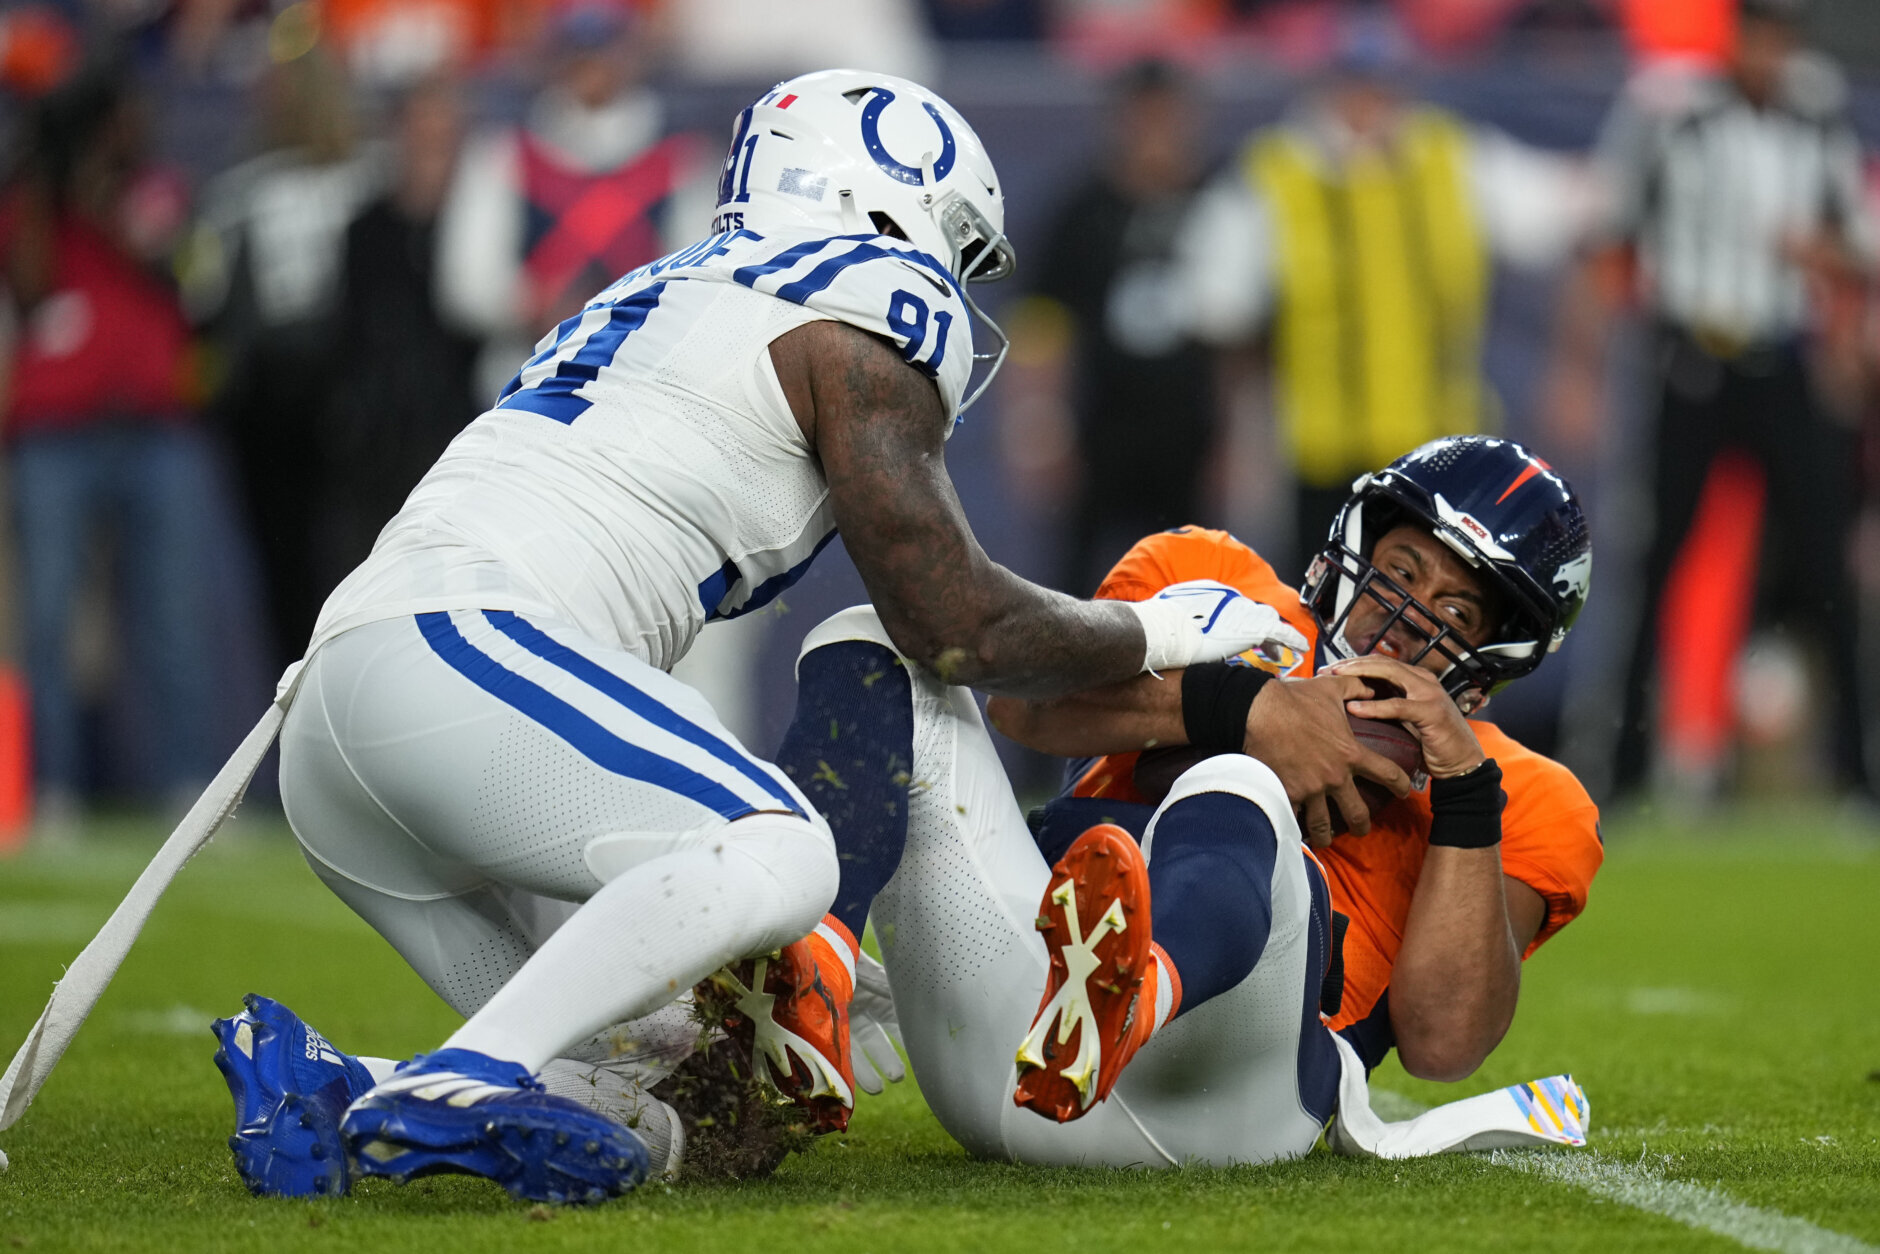 <p><b><i>Colts 12</i></b><br />
<b><i>Broncos 9 (OT)</i></b></p>
<p>The Peyton Manning Bowl might have been better off if present-day Peyton played in it.</p>
<p>Matt Ryan led Indy to <a href="https://twitter.com/espnstatsinfo/status/1578234721296961538?s=46&amp;t=W1DJCkxPlp73OhEKmsp0SQ" target="_blank" rel="noopener" data-saferedirecturl="https://www.google.com/url?q=https://twitter.com/espnstatsinfo/status/1578234721296961538?s%3D46%26t%3DW1DJCkxPlp73OhEKmsp0SQ&amp;source=gmail&amp;ust=1665438721987000&amp;usg=AOvVaw217B1vtQSj0yiiy4vWmmmT">one of the ugliest wins in NFL history</a> (regardless of <a href="https://profootballtalk.nbcsports.com/2022/10/07/jim-irsay-there-is-no-such-thing-as-an-ugly-win/" target="_blank" rel="noopener" data-saferedirecturl="https://www.google.com/url?q=https://profootballtalk.nbcsports.com/2022/10/07/jim-irsay-there-is-no-such-thing-as-an-ugly-win/&amp;source=gmail&amp;ust=1665438721987000&amp;usg=AOvVaw3doR8sQn6InHzA2aYPizp9">what his boss says</a>) and Russell Wilson is mired in <a href="https://profootballtalk.nbcsports.com/2022/10/07/whats-wrong-with-russell-wilson-2/" target="_blank" rel="noopener" data-saferedirecturl="https://www.google.com/url?q=https://profootballtalk.nbcsports.com/2022/10/07/whats-wrong-with-russell-wilson-2/&amp;source=gmail&amp;ust=1665438721987000&amp;usg=AOvVaw2SNuJwxJXWqJDl4Oy_5op5">the most bafflingly rapid decline</a> I&#8217;ve ever seen from an elite quarterback. We knew this trade would be a franchise-altering move for Denver — just not the kind that cripples the Broncos for years to come.</p>
